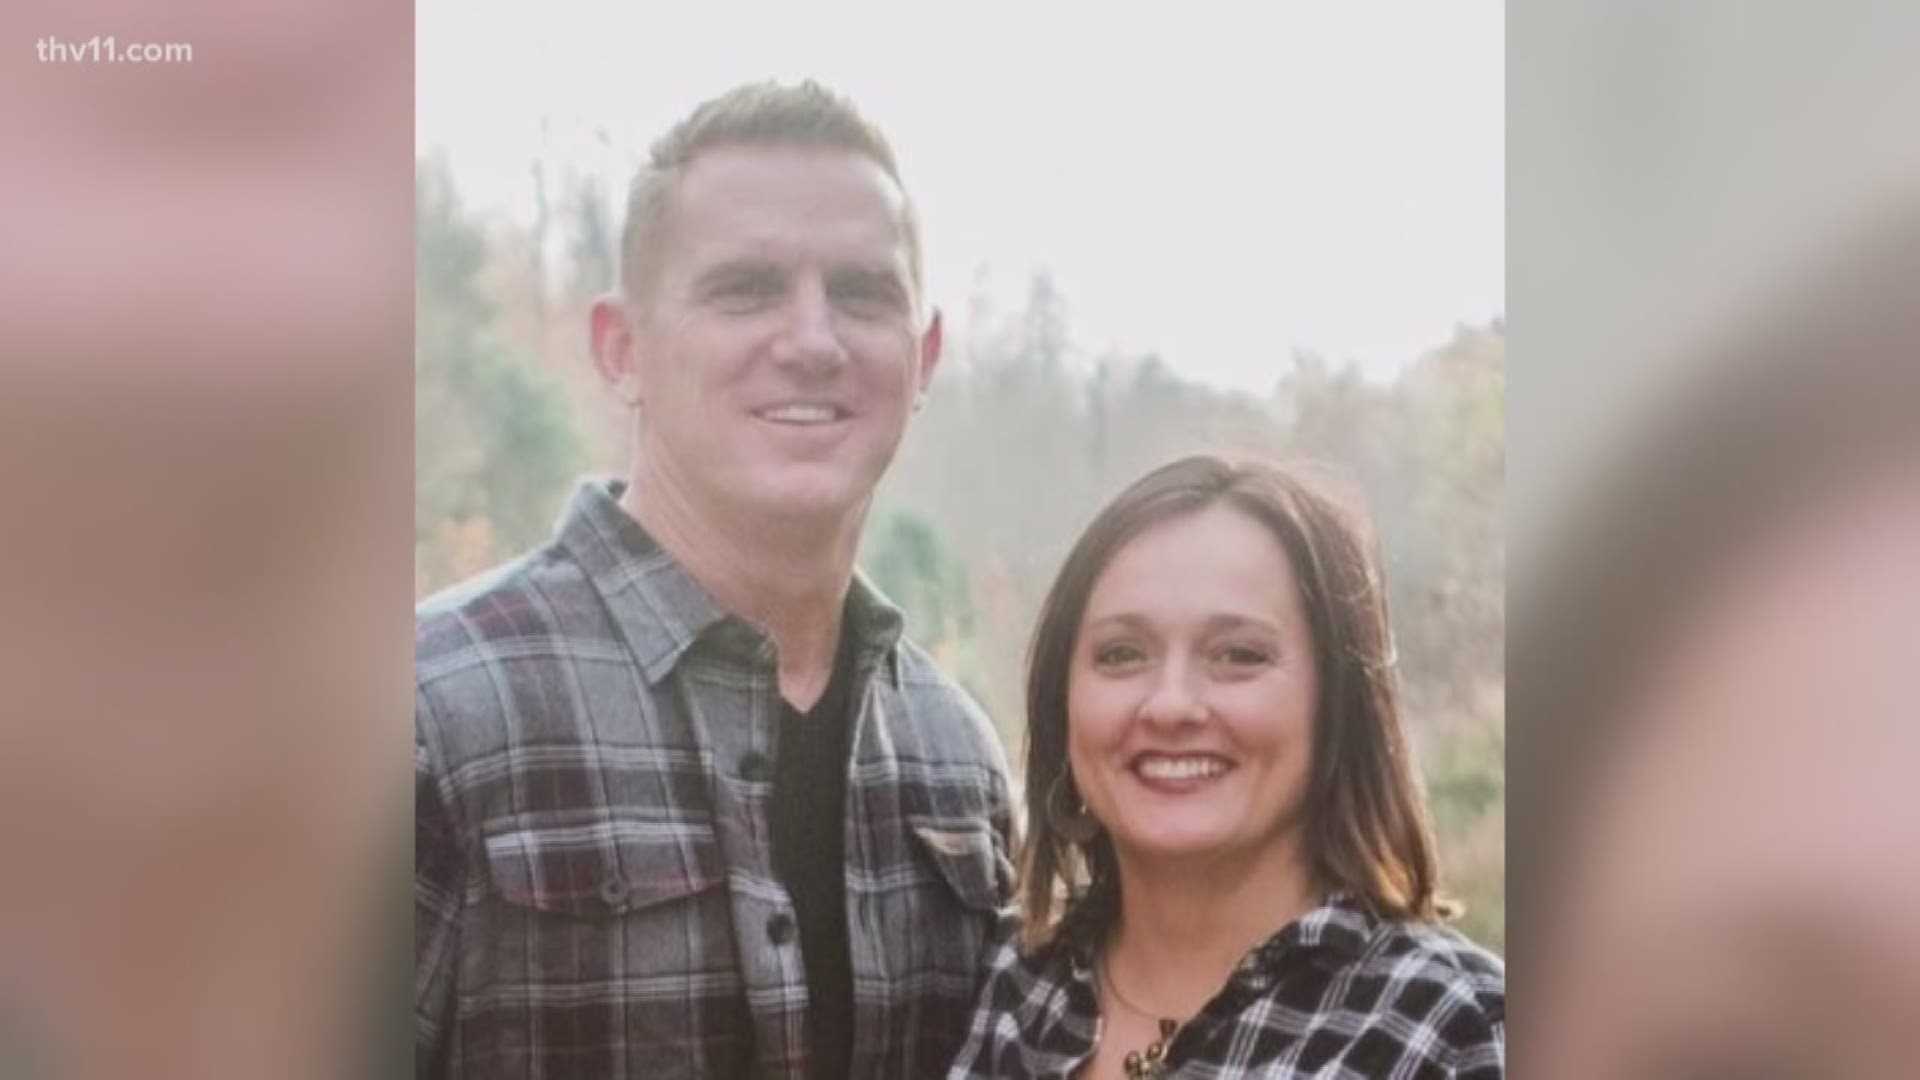 The Jonesboro community continues to rally around Wendy Anderson, the wife of A-State football coach Blake Anderson, as she recovers from surgery for brain cancer.